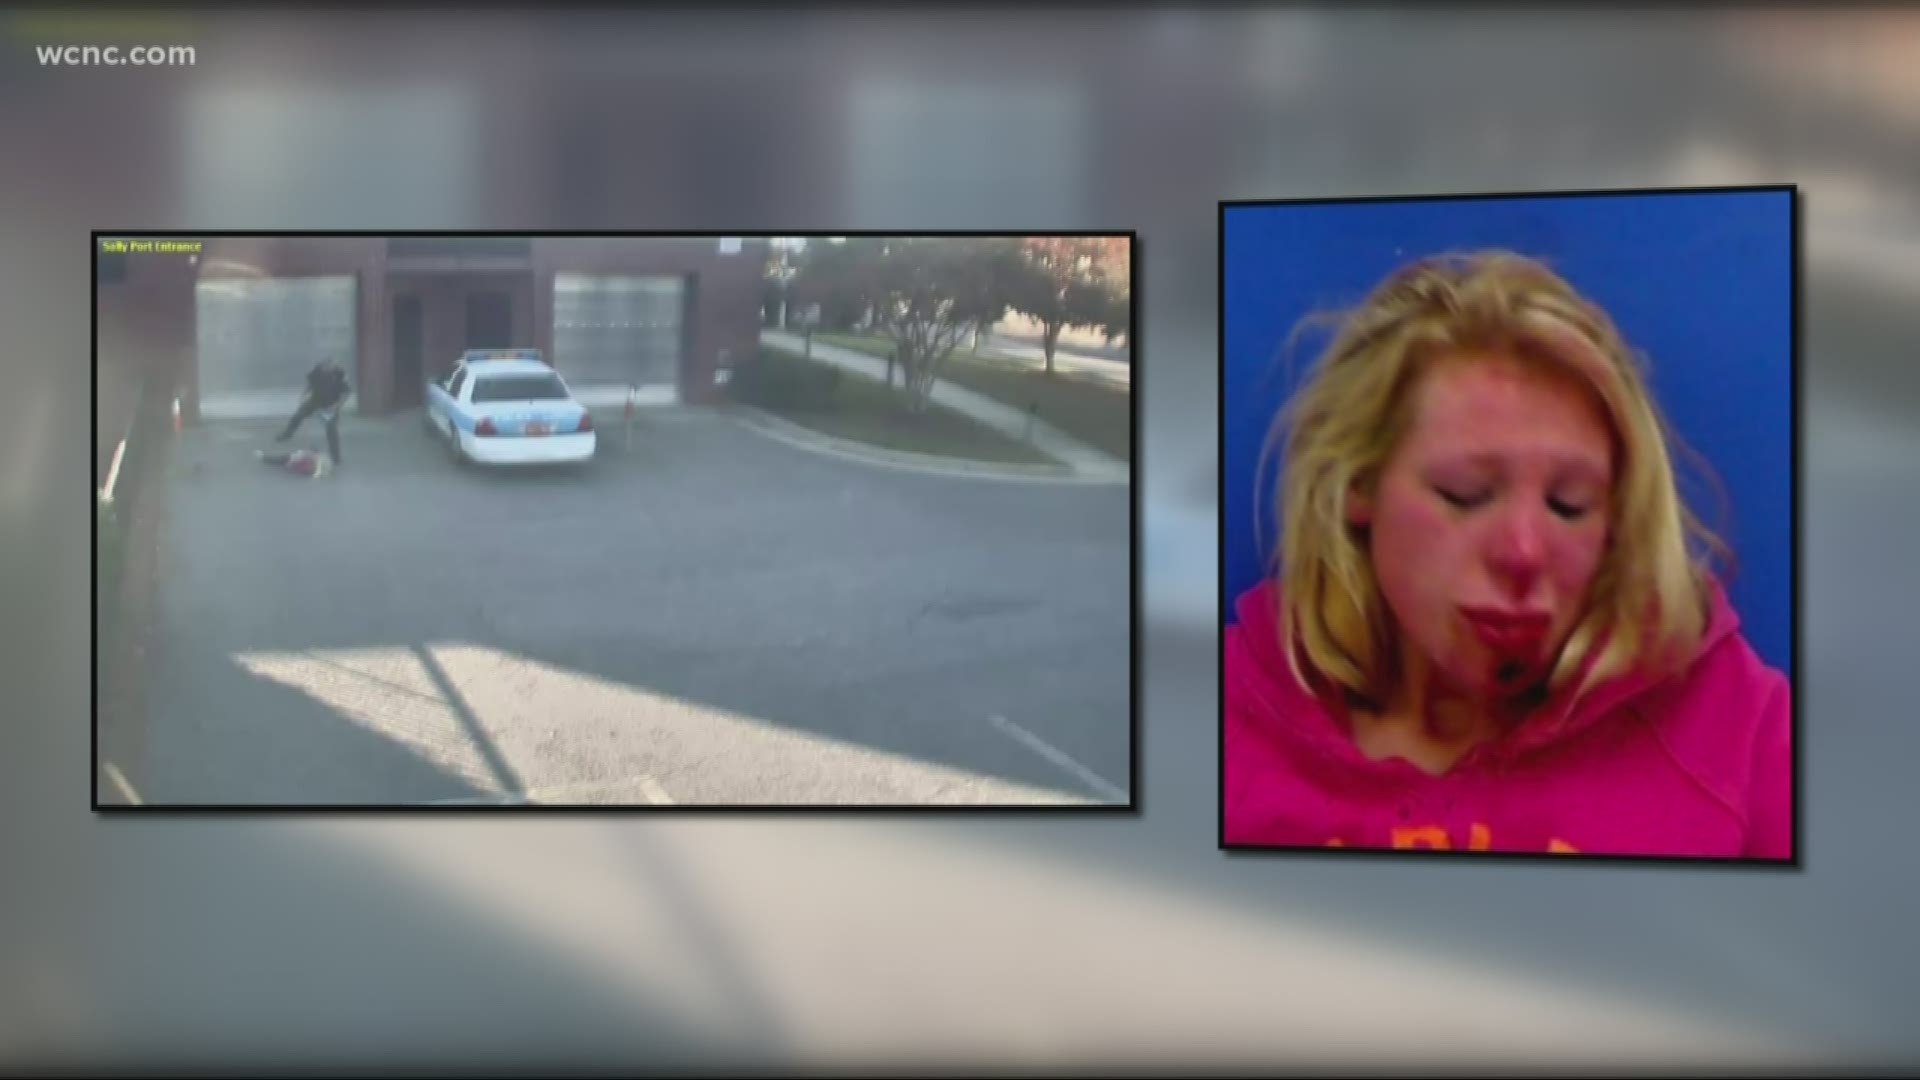 The incident happened at the Hickory Police Department in 2013. Video shows the former officer slamming a woman to the concrete while she was in custody.